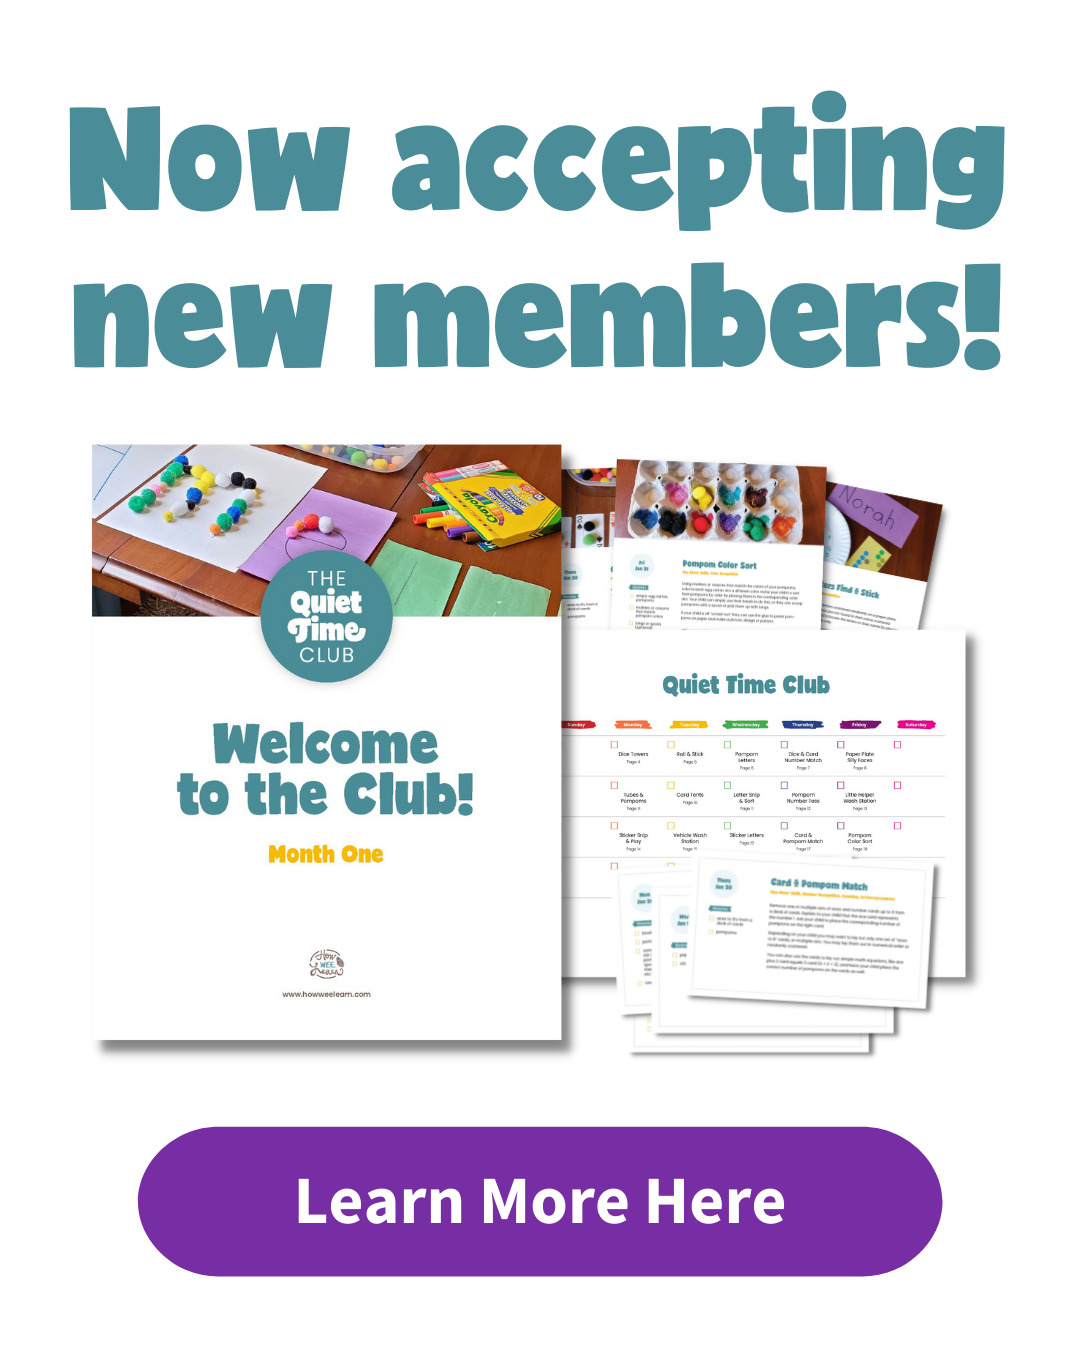 Now accepting new members! Learn More Here